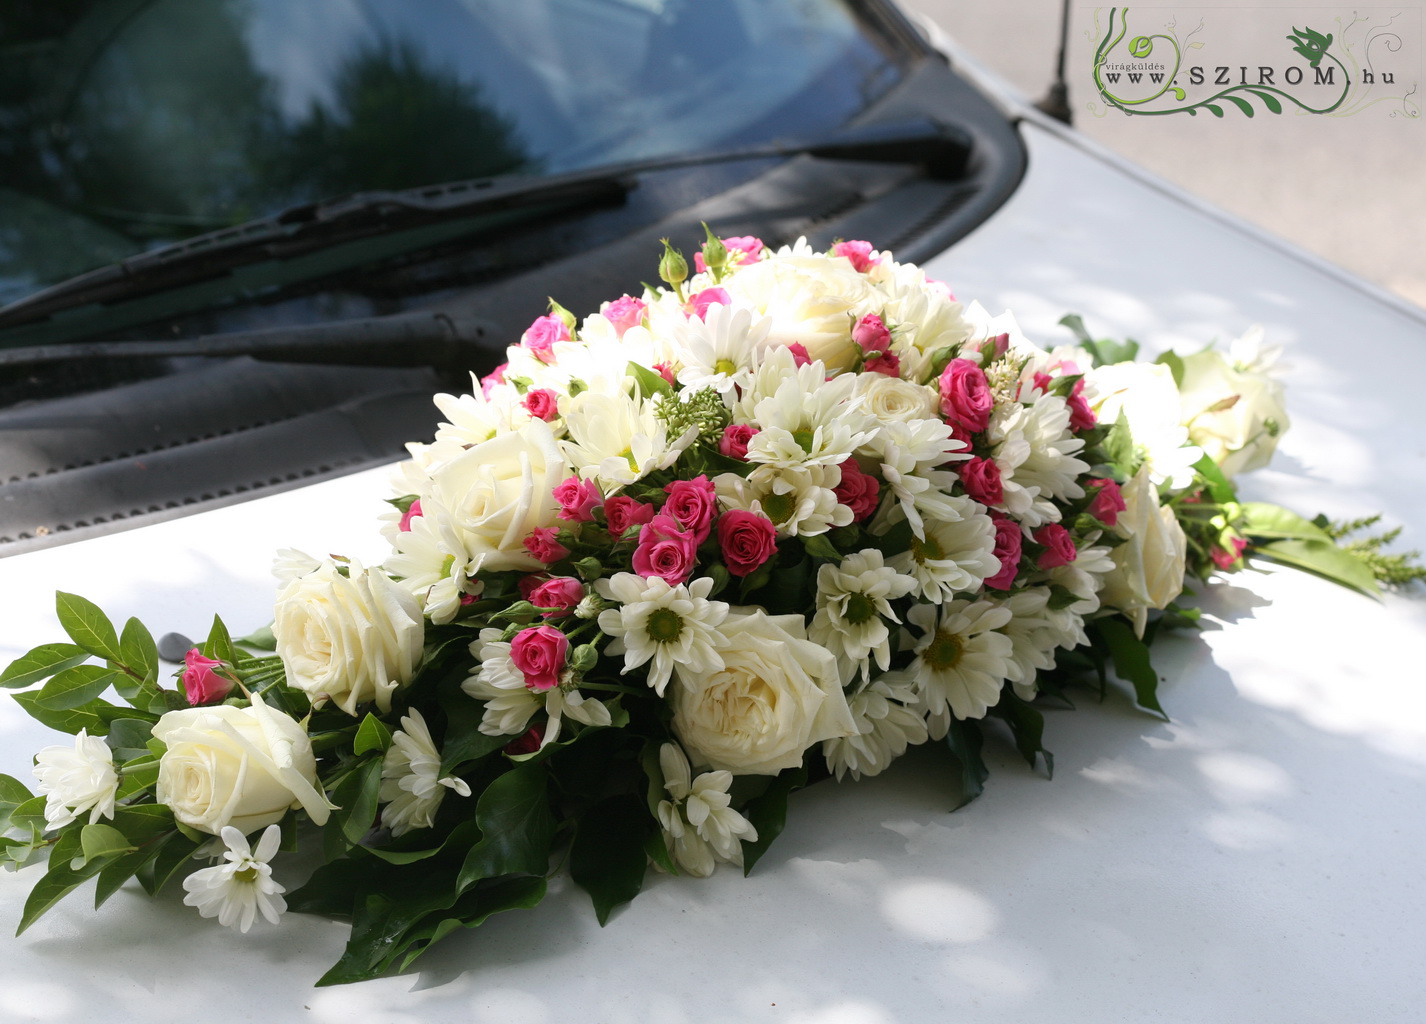 flower delivery Budapest - oval car flower arrangement with spray roses and daisies (white, pink)